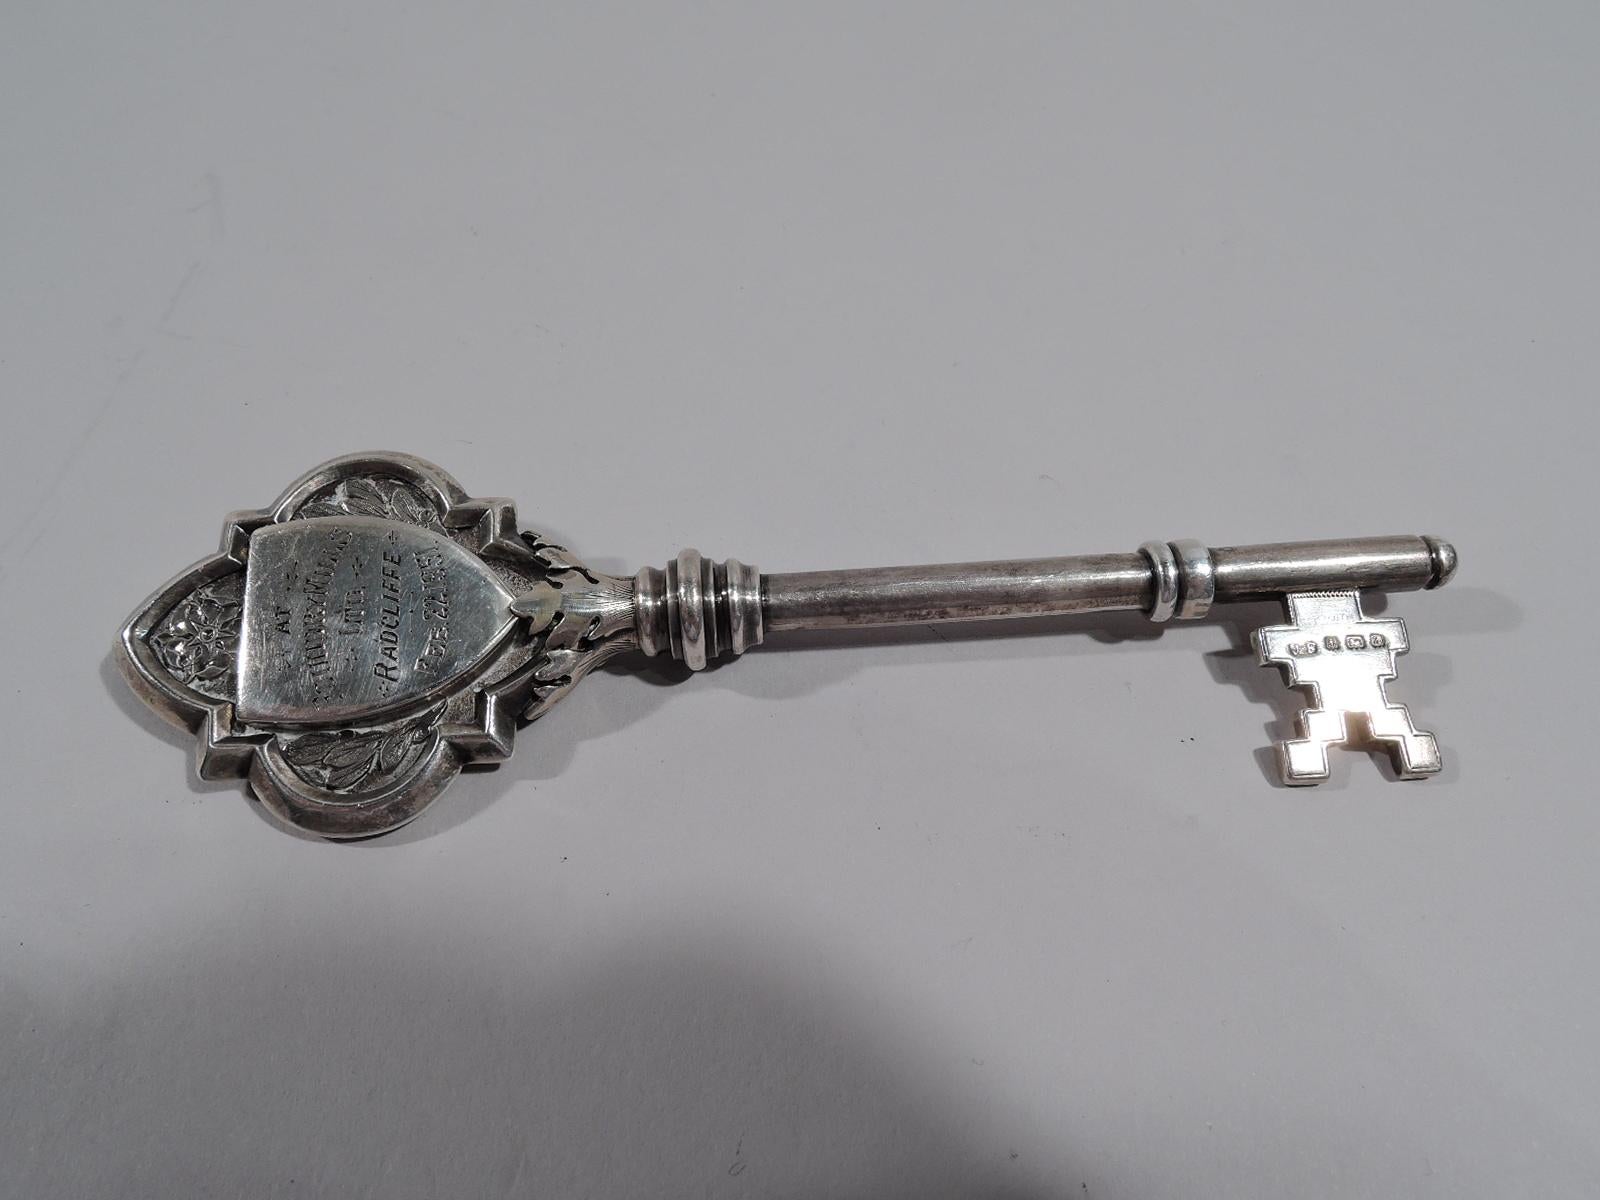 Victorian sterling silver ceremonial key. Made by James Fenton & Co. in Birmingham in 1900. Shaped and curvilinear double-sided head with chased leaves and flowers and armorial cartouches; fretwork bit. Engraved presentation. On front cartouche: